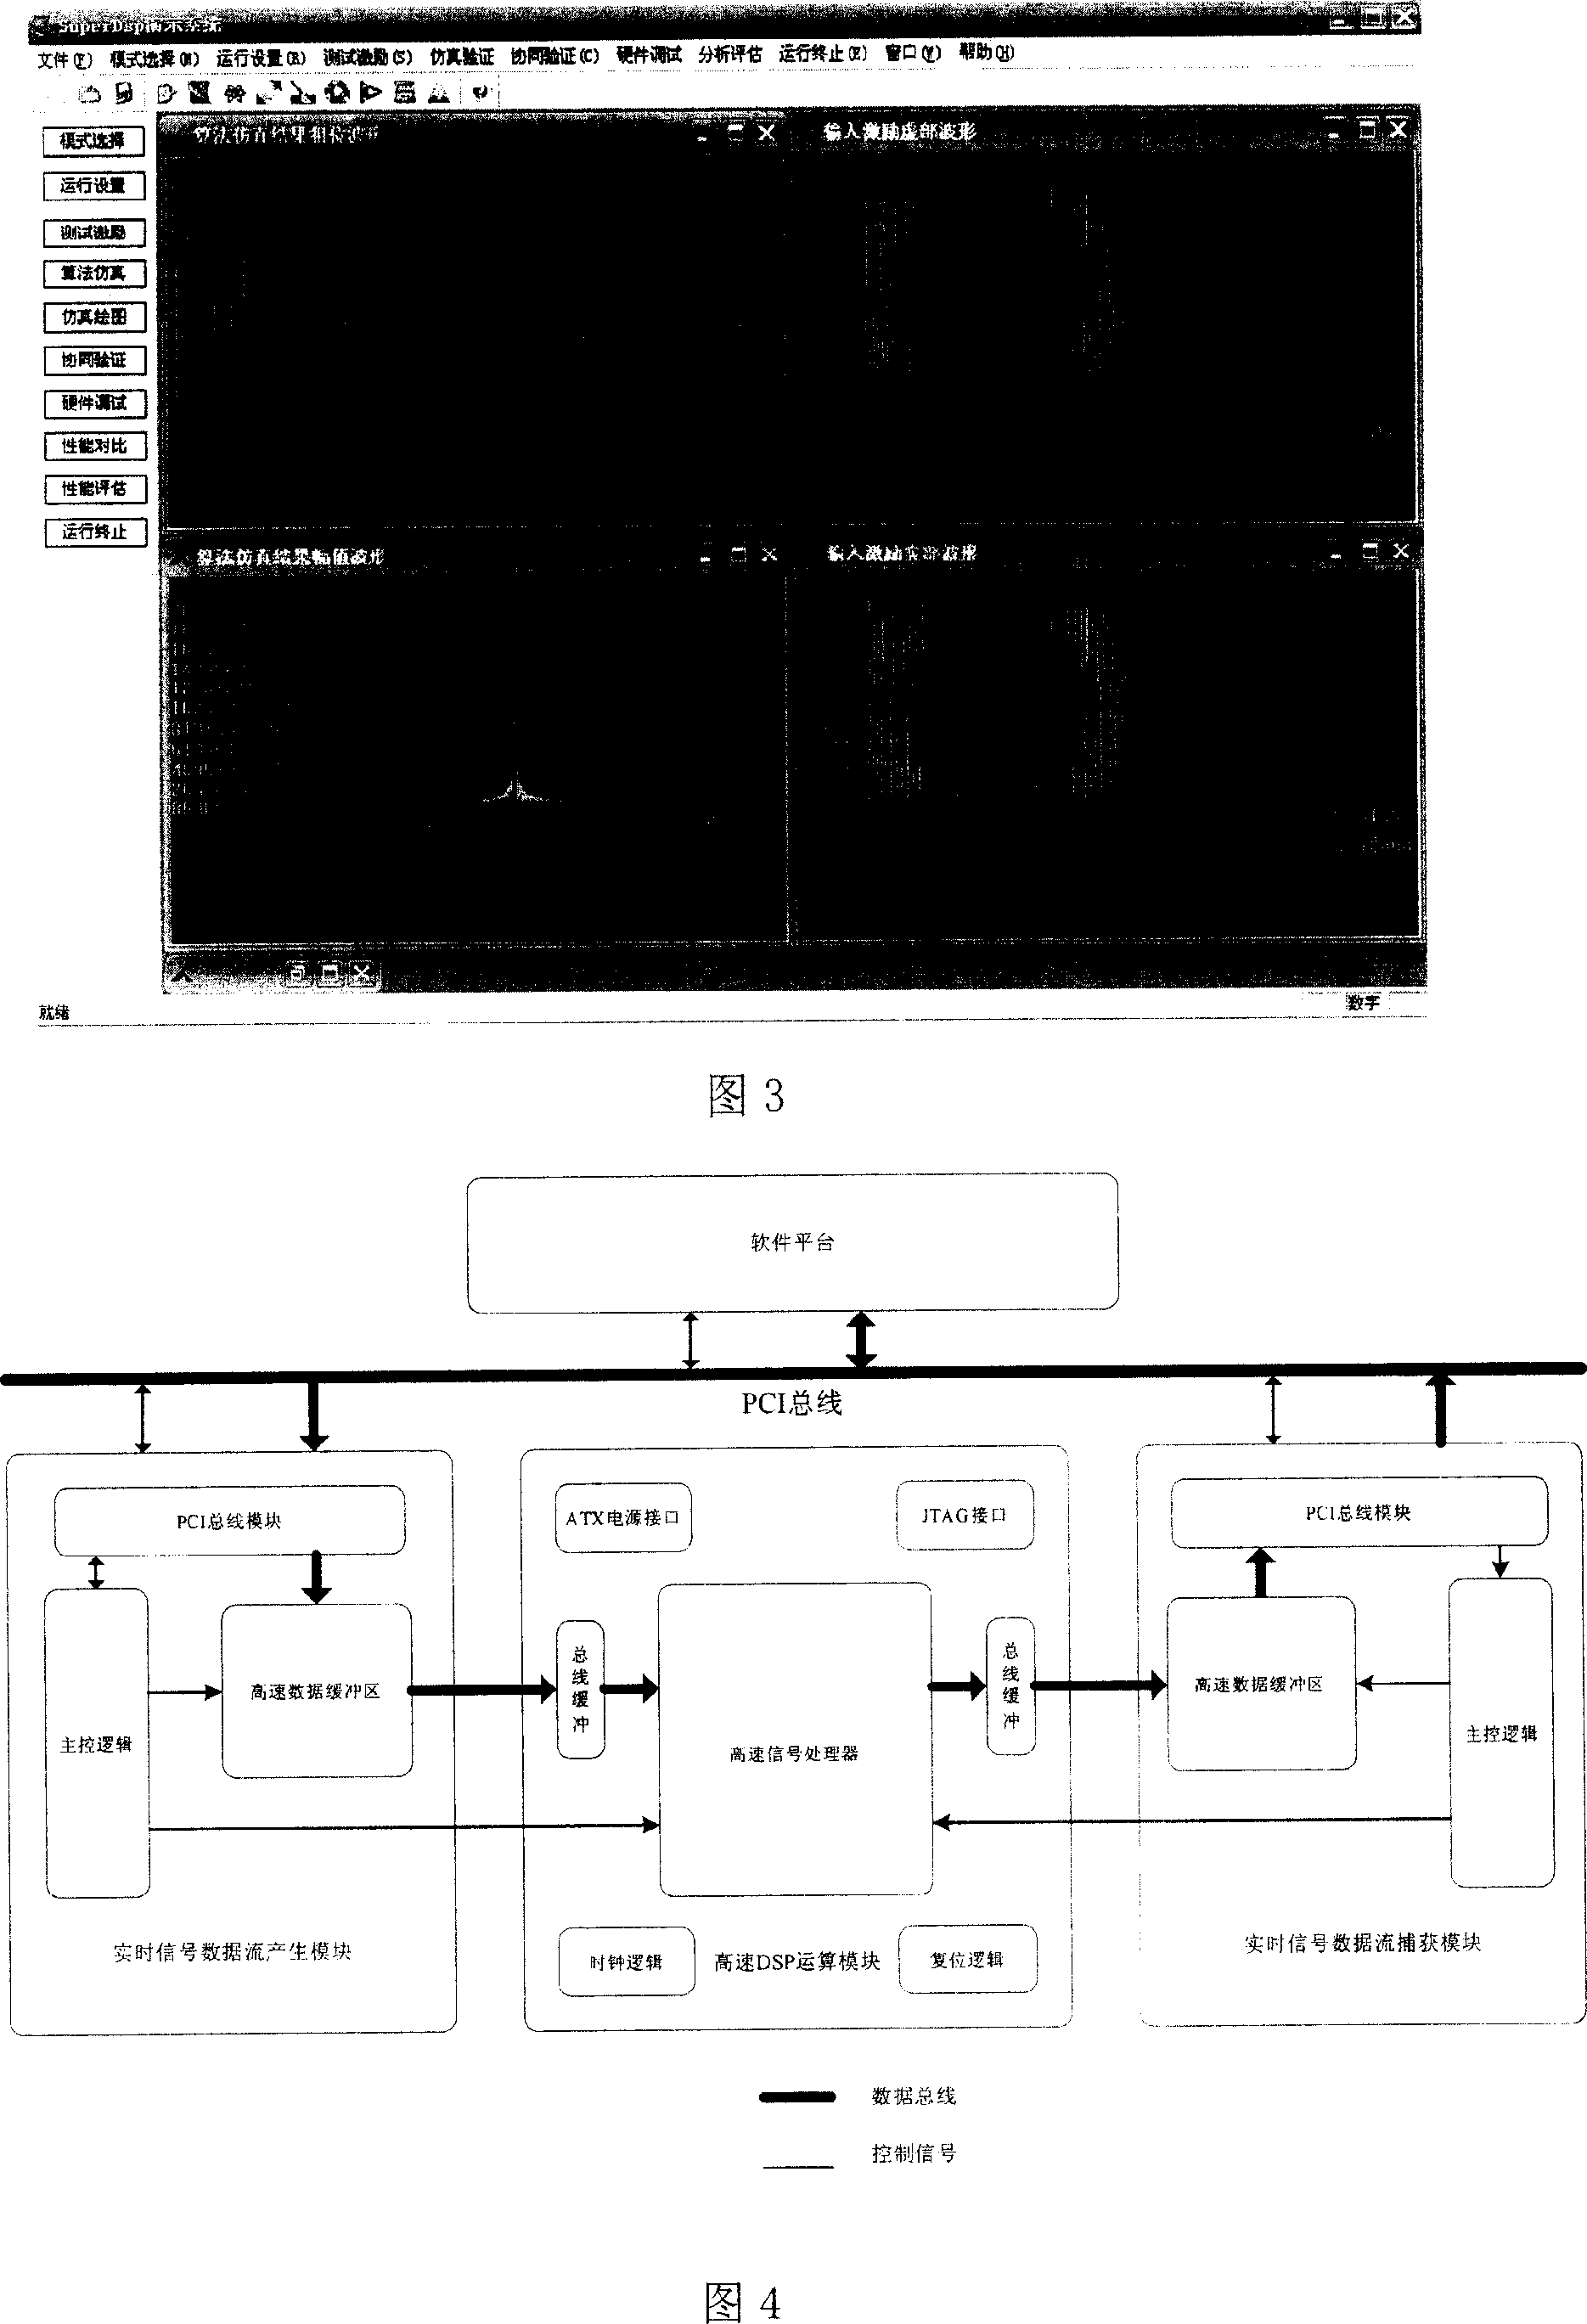 Real-time simulation development system and method therefor